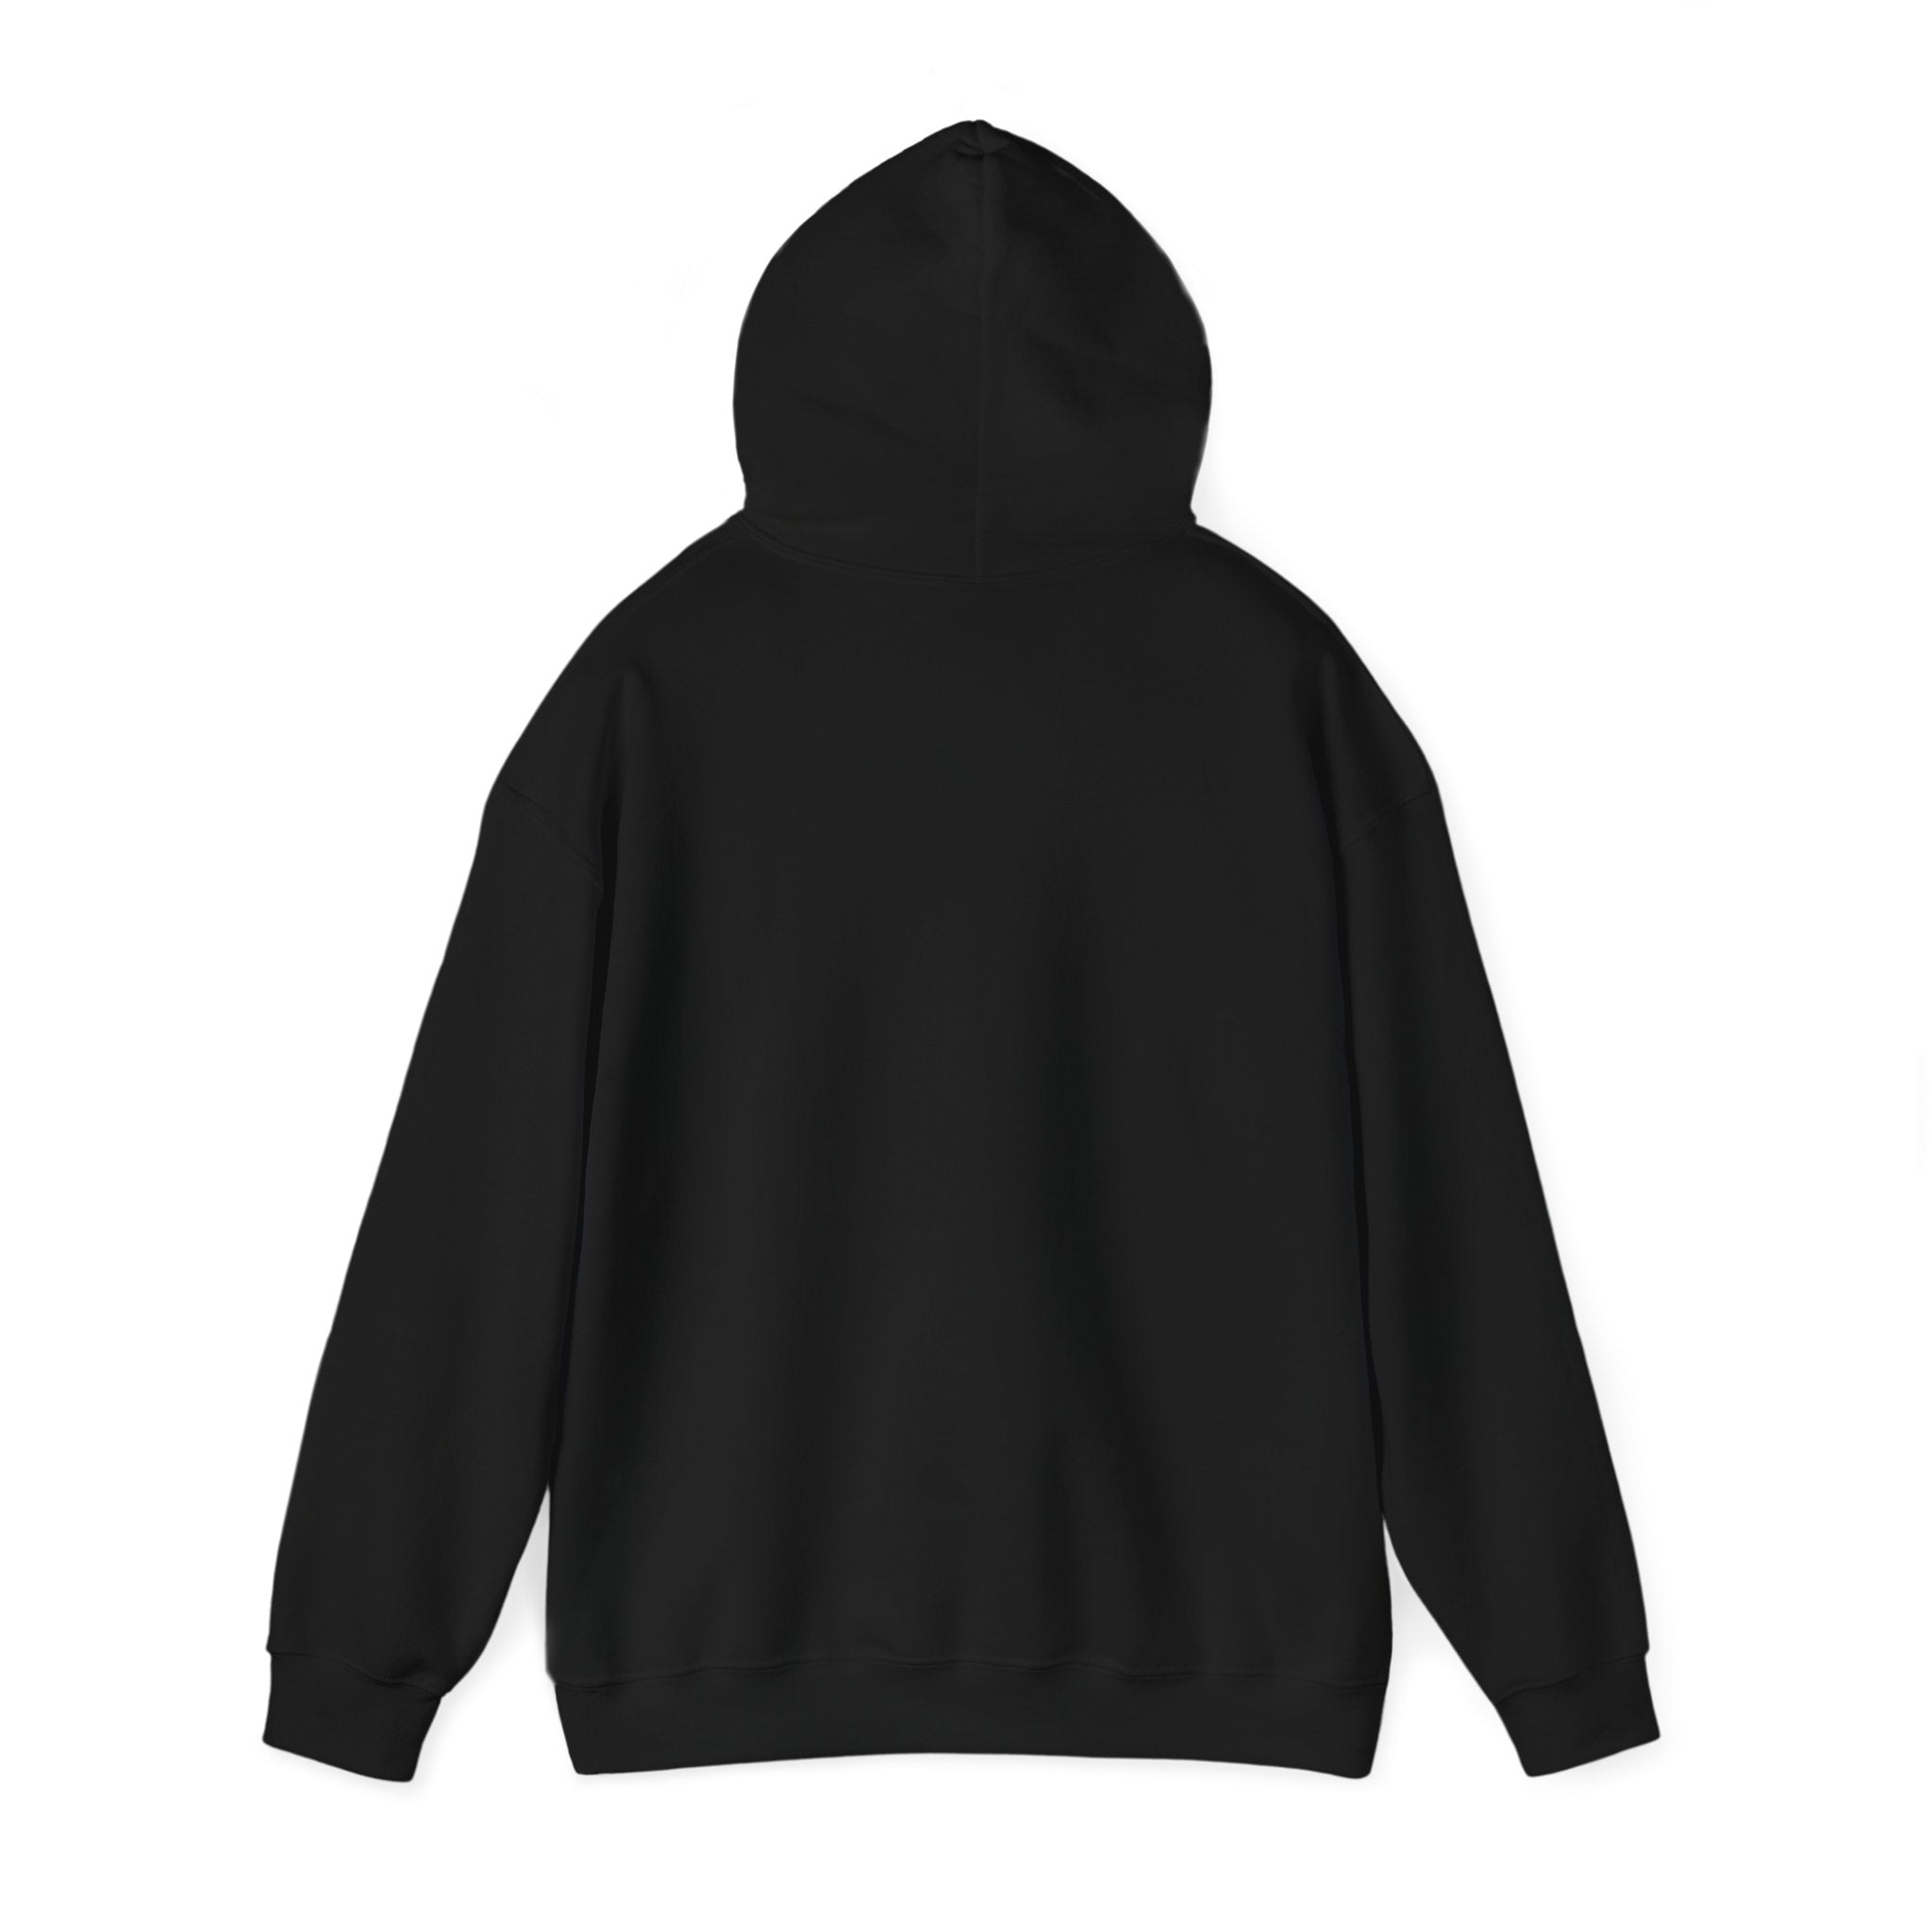 A "Professional Overthinker - Hooded Sweatshirt" shown from the back, featuring a hood and long sleeves. The garment appears plain without any visible logos or patterns, offering both style and comfort. Perfect for those who appreciate minimalist fashion, this piece complements the "Professional Overthinker" design seamlessly.